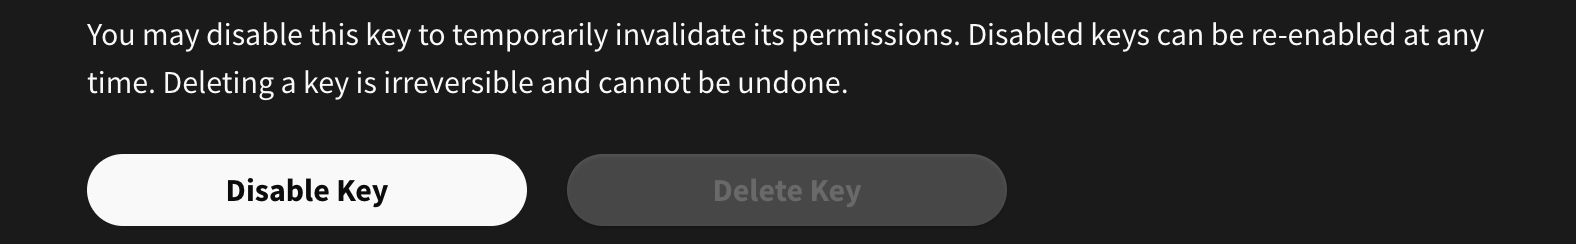 2023-03-08_10.38.09_Disable_Key_Button.png